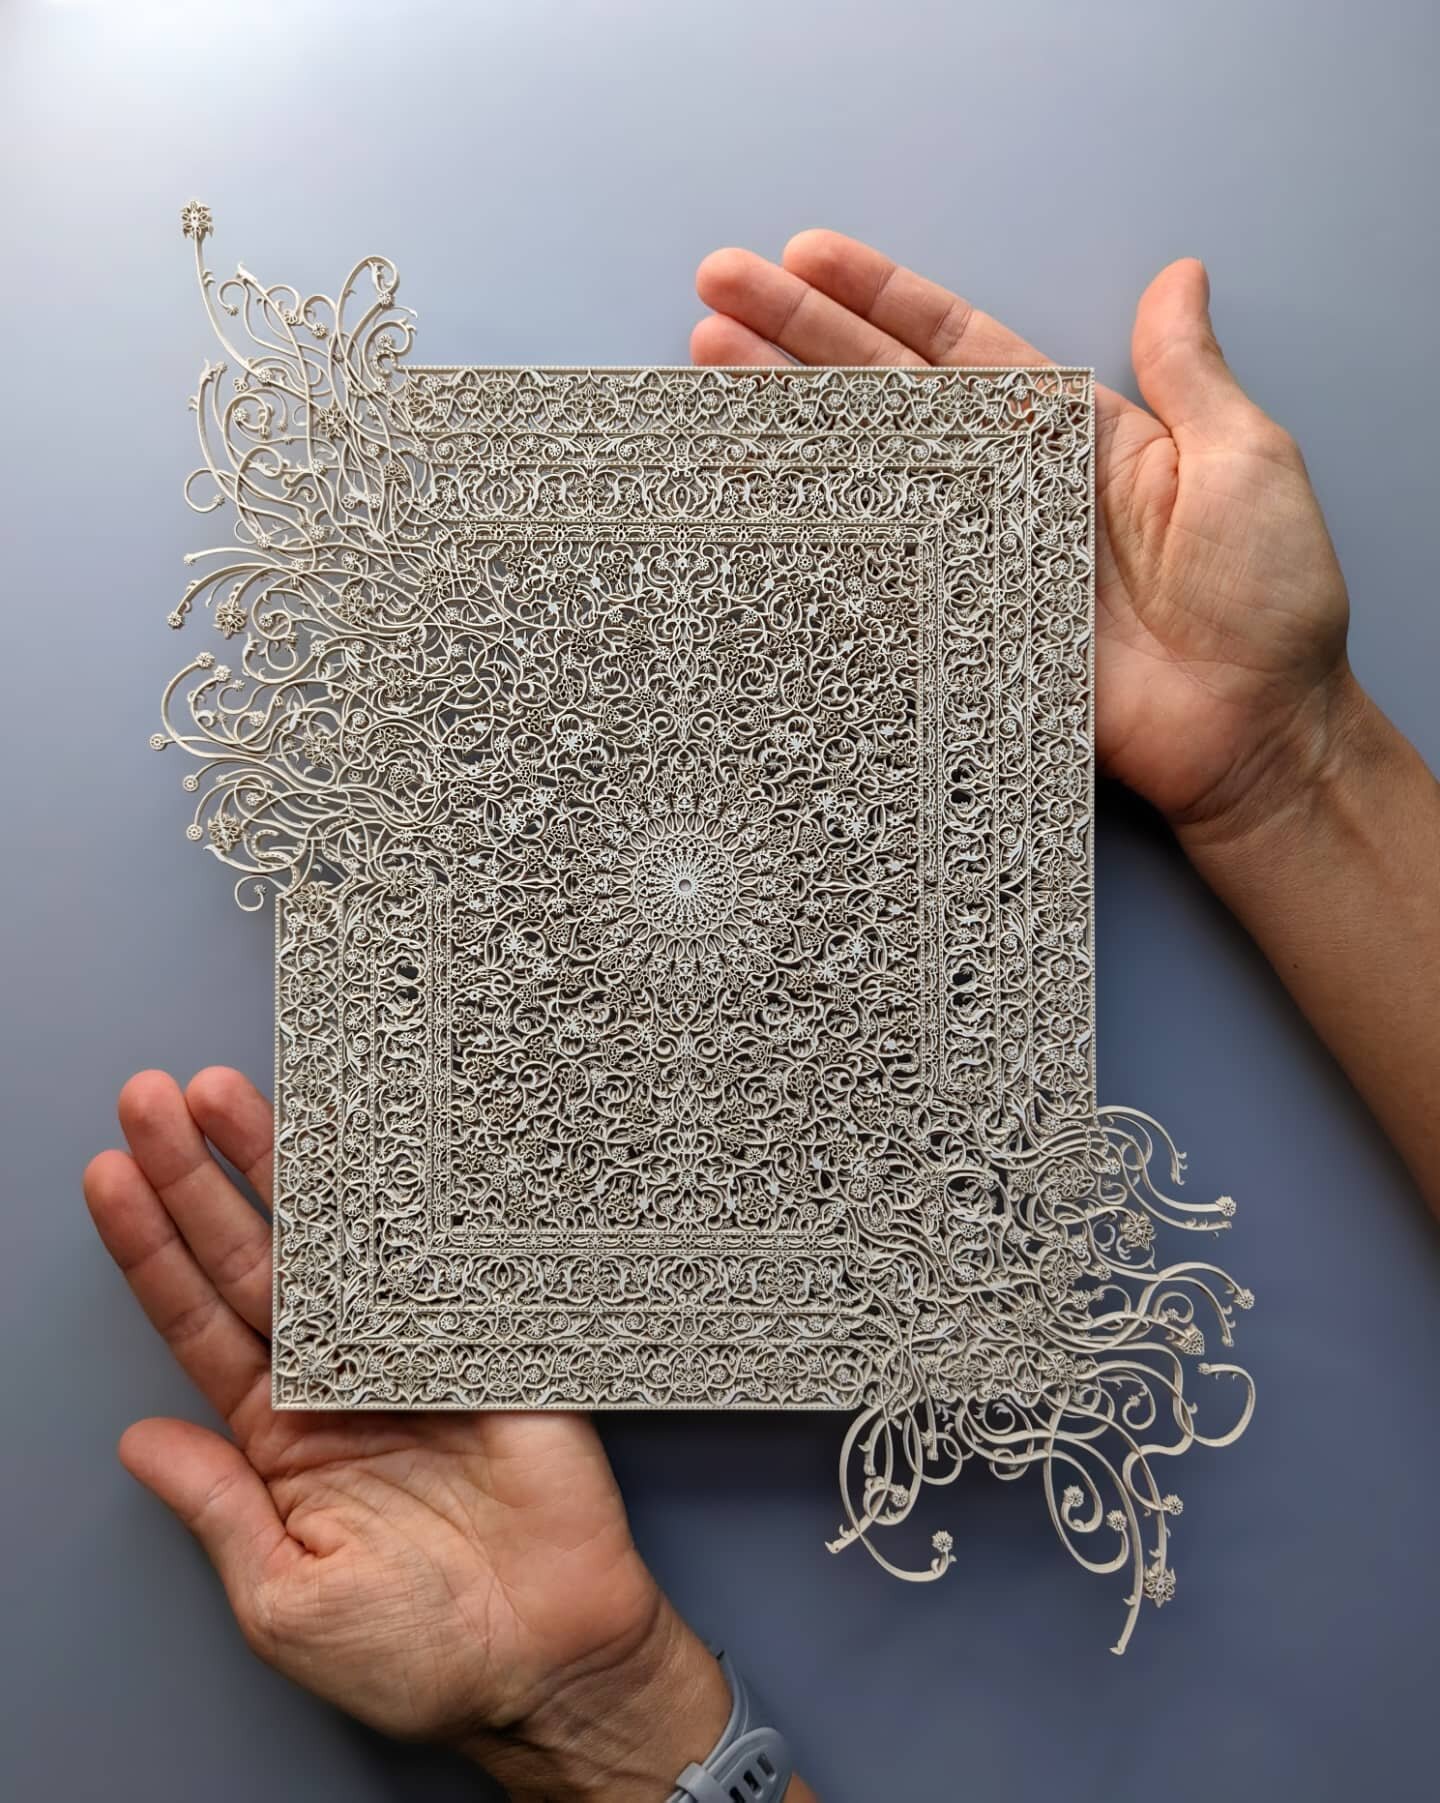 Continuing to evolve (and taking an awfully long time to cut each section)

Layered laser cut papers (15cm x 20cm)

#detailphoto #workinprogress 
#algorithm #script #handmade #lasercut #floraldesign #arabesque #sculpture #pattern #sculpture #decorati